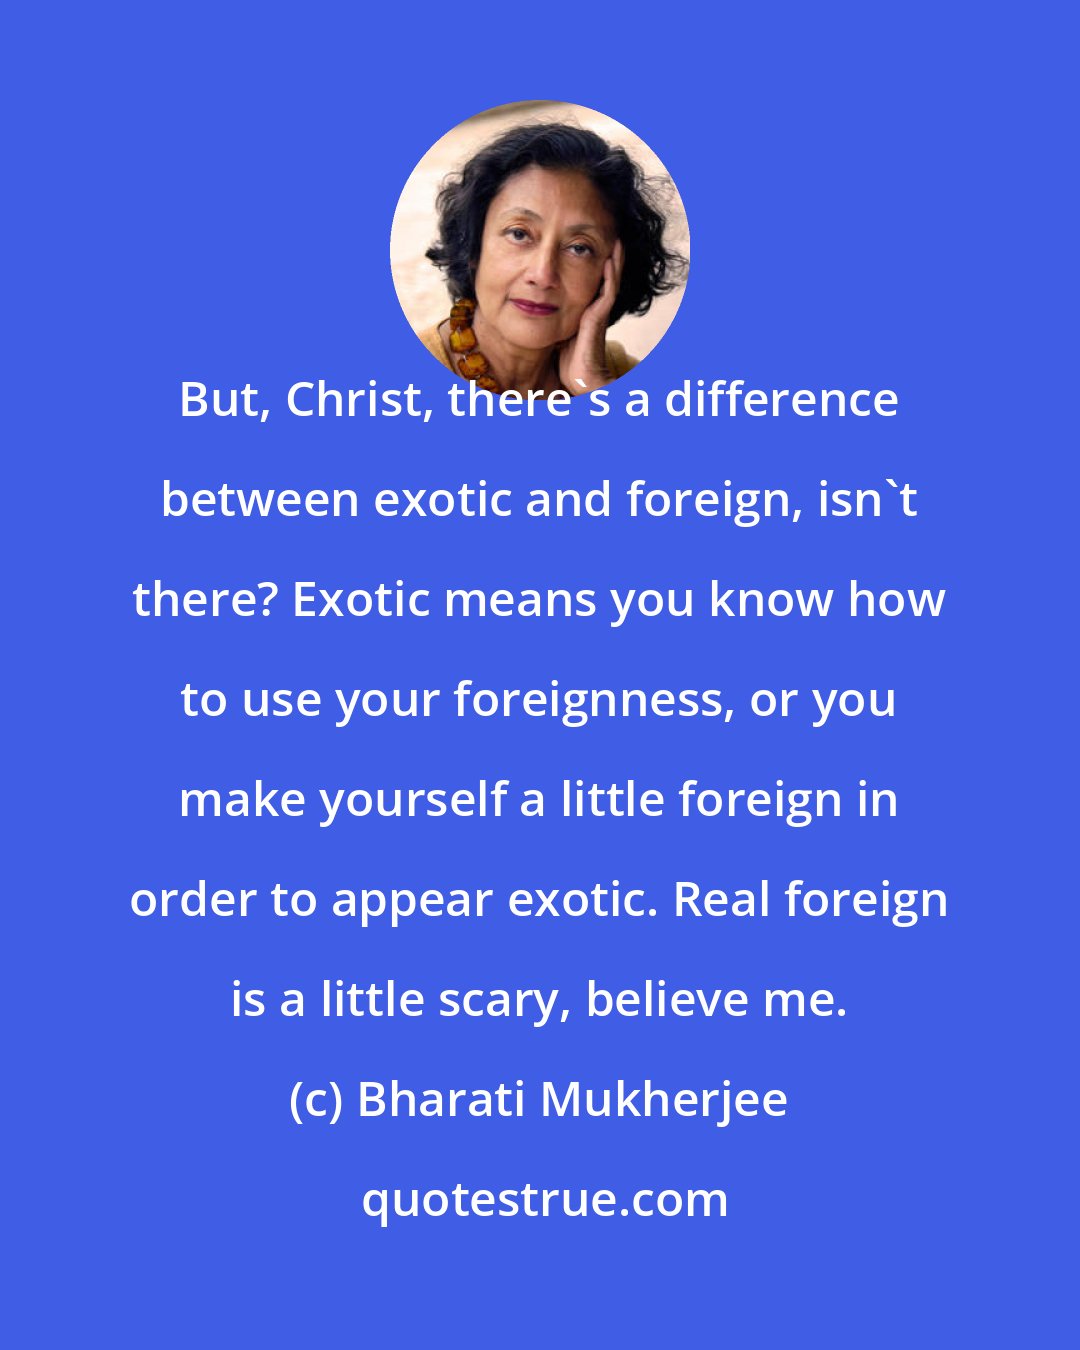 Bharati Mukherjee: But, Christ, there's a difference between exotic and foreign, isn't there? Exotic means you know how to use your foreignness, or you make yourself a little foreign in order to appear exotic. Real foreign is a little scary, believe me.